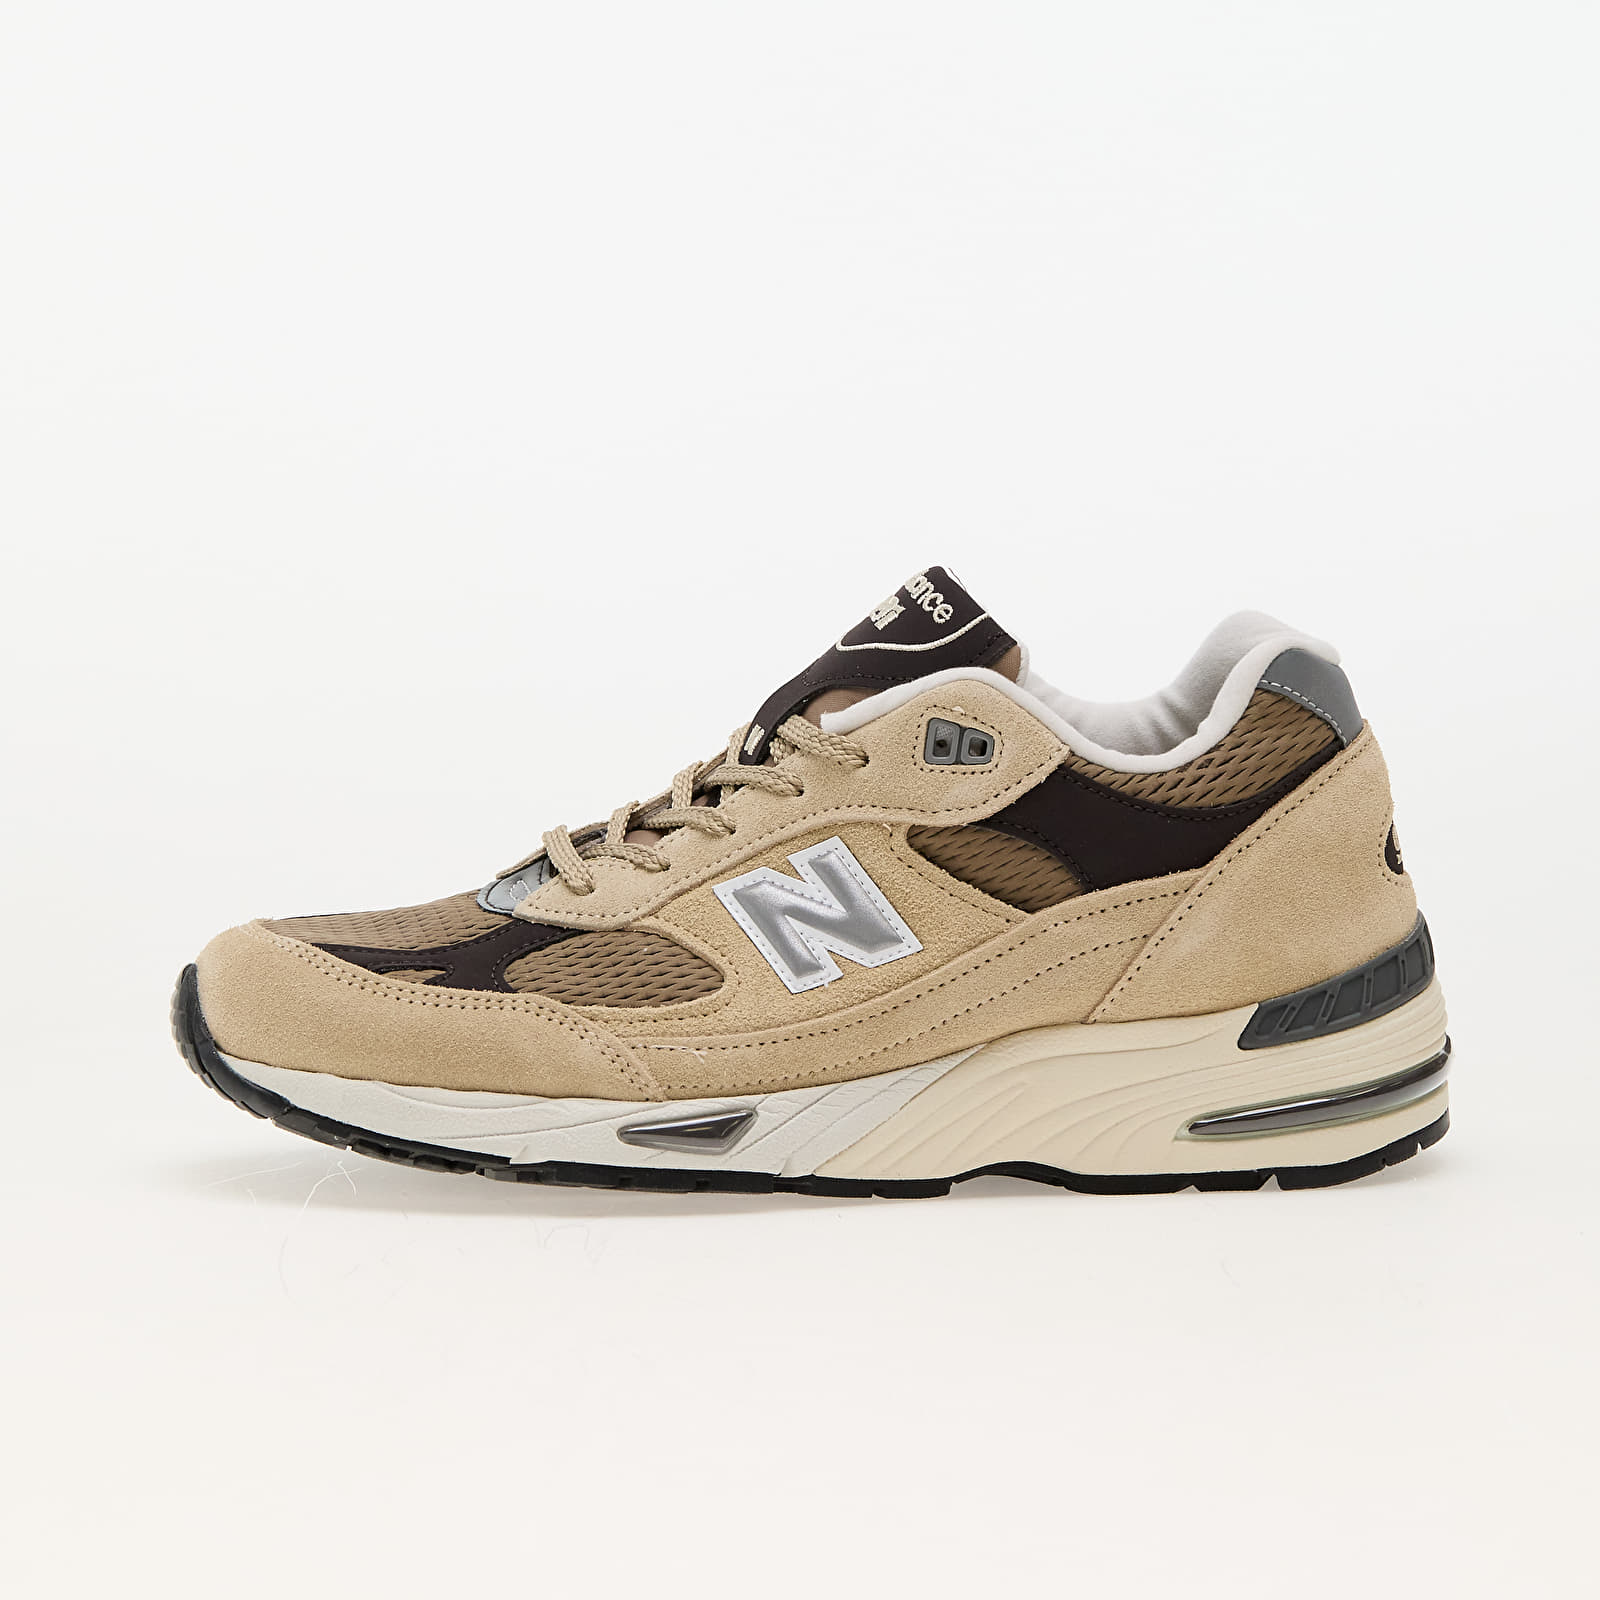 Men's shoes New Balance 991 Made in UK Beige